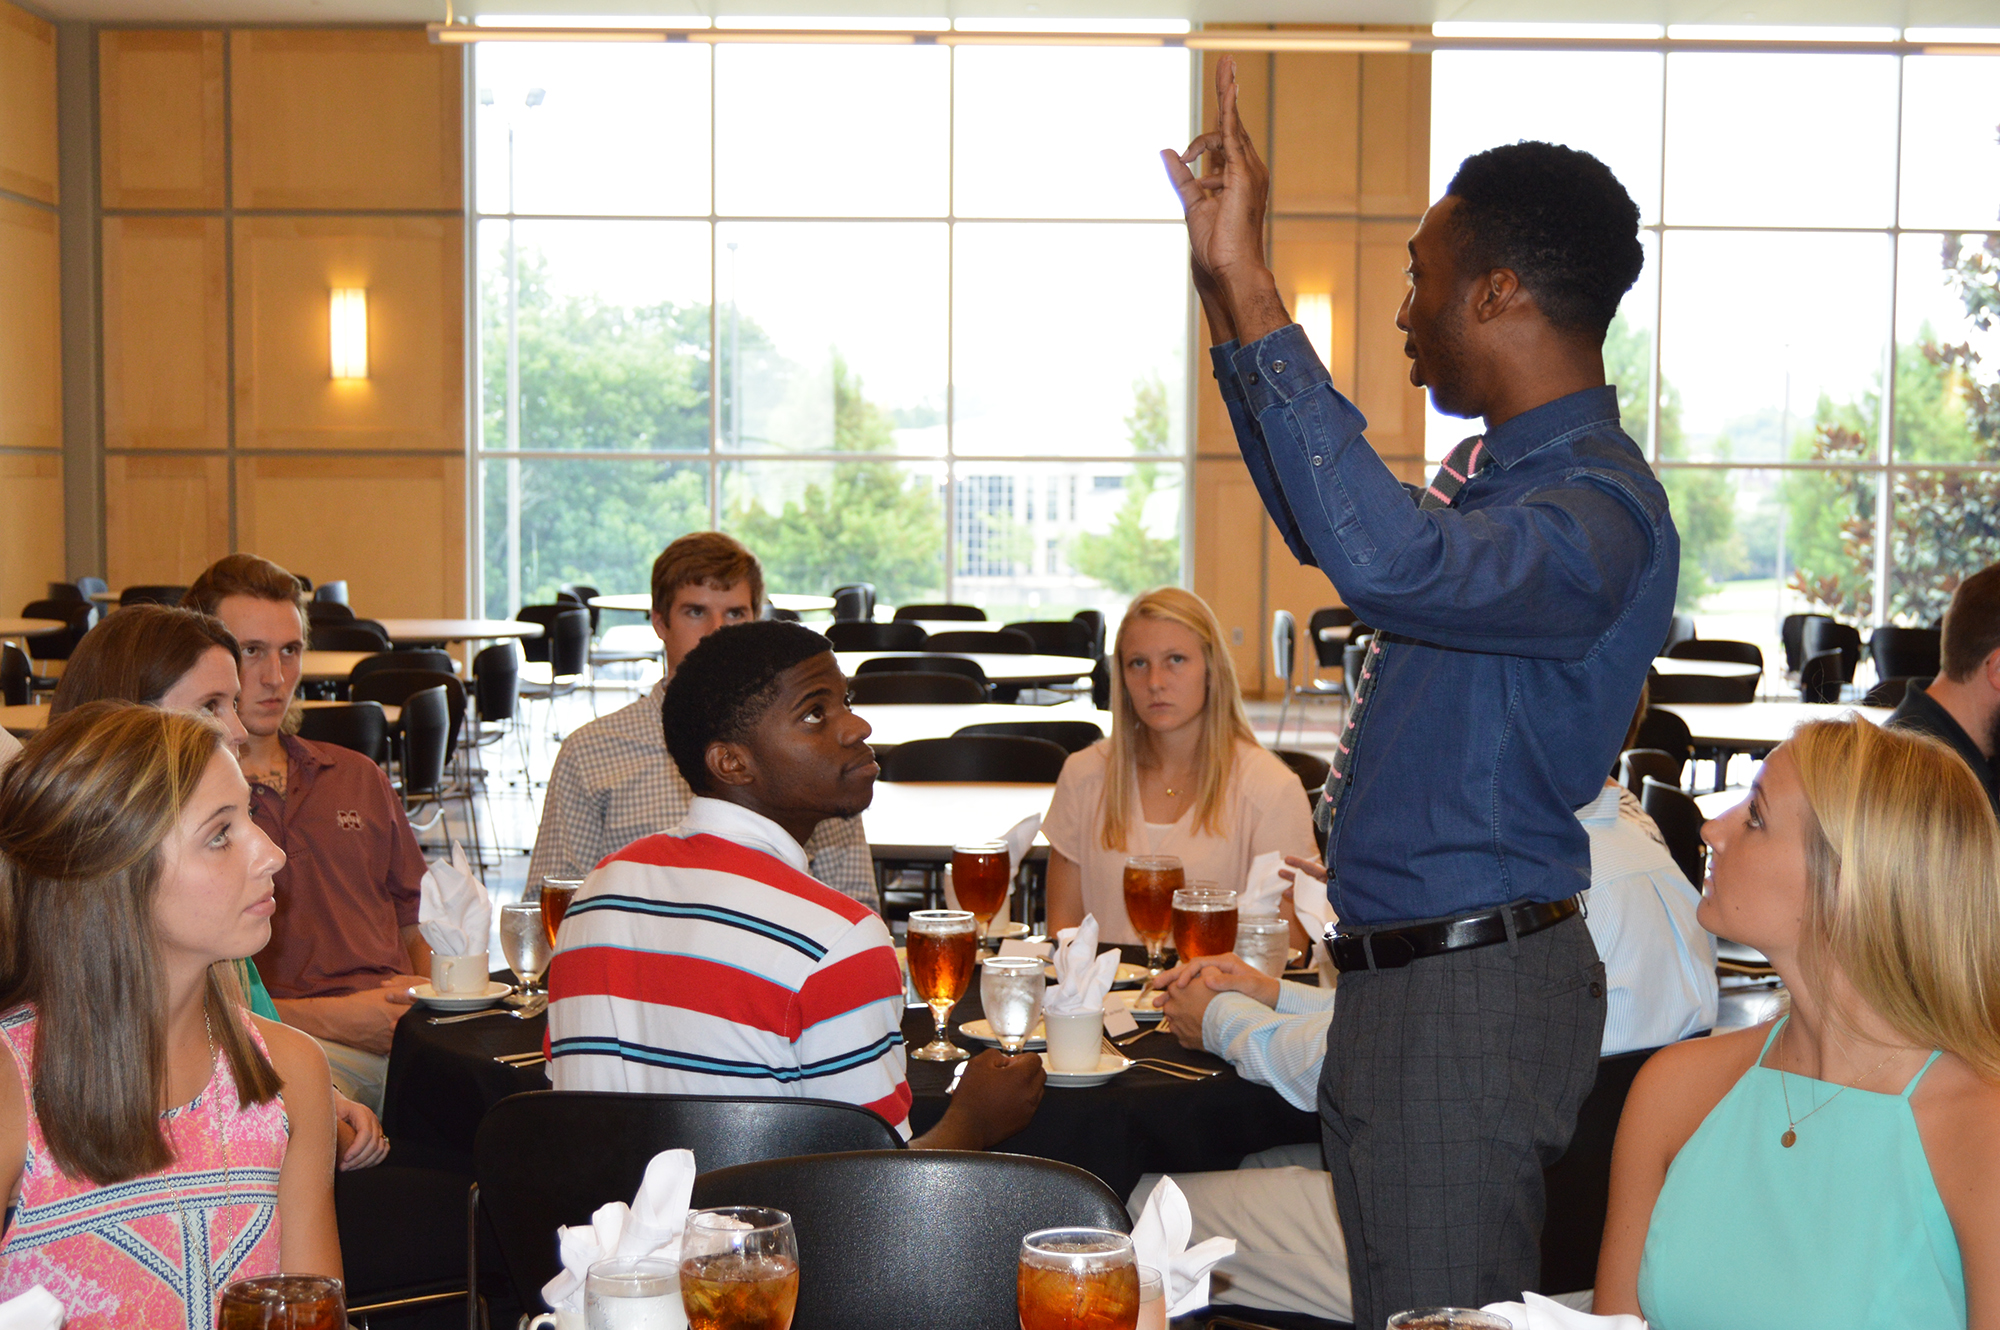 Ryan Colvin with MSU's Career Center speaks during the recent etiquette luncheon held as part of a summer life skills course. The event was designed to prepare students for future professional settings.